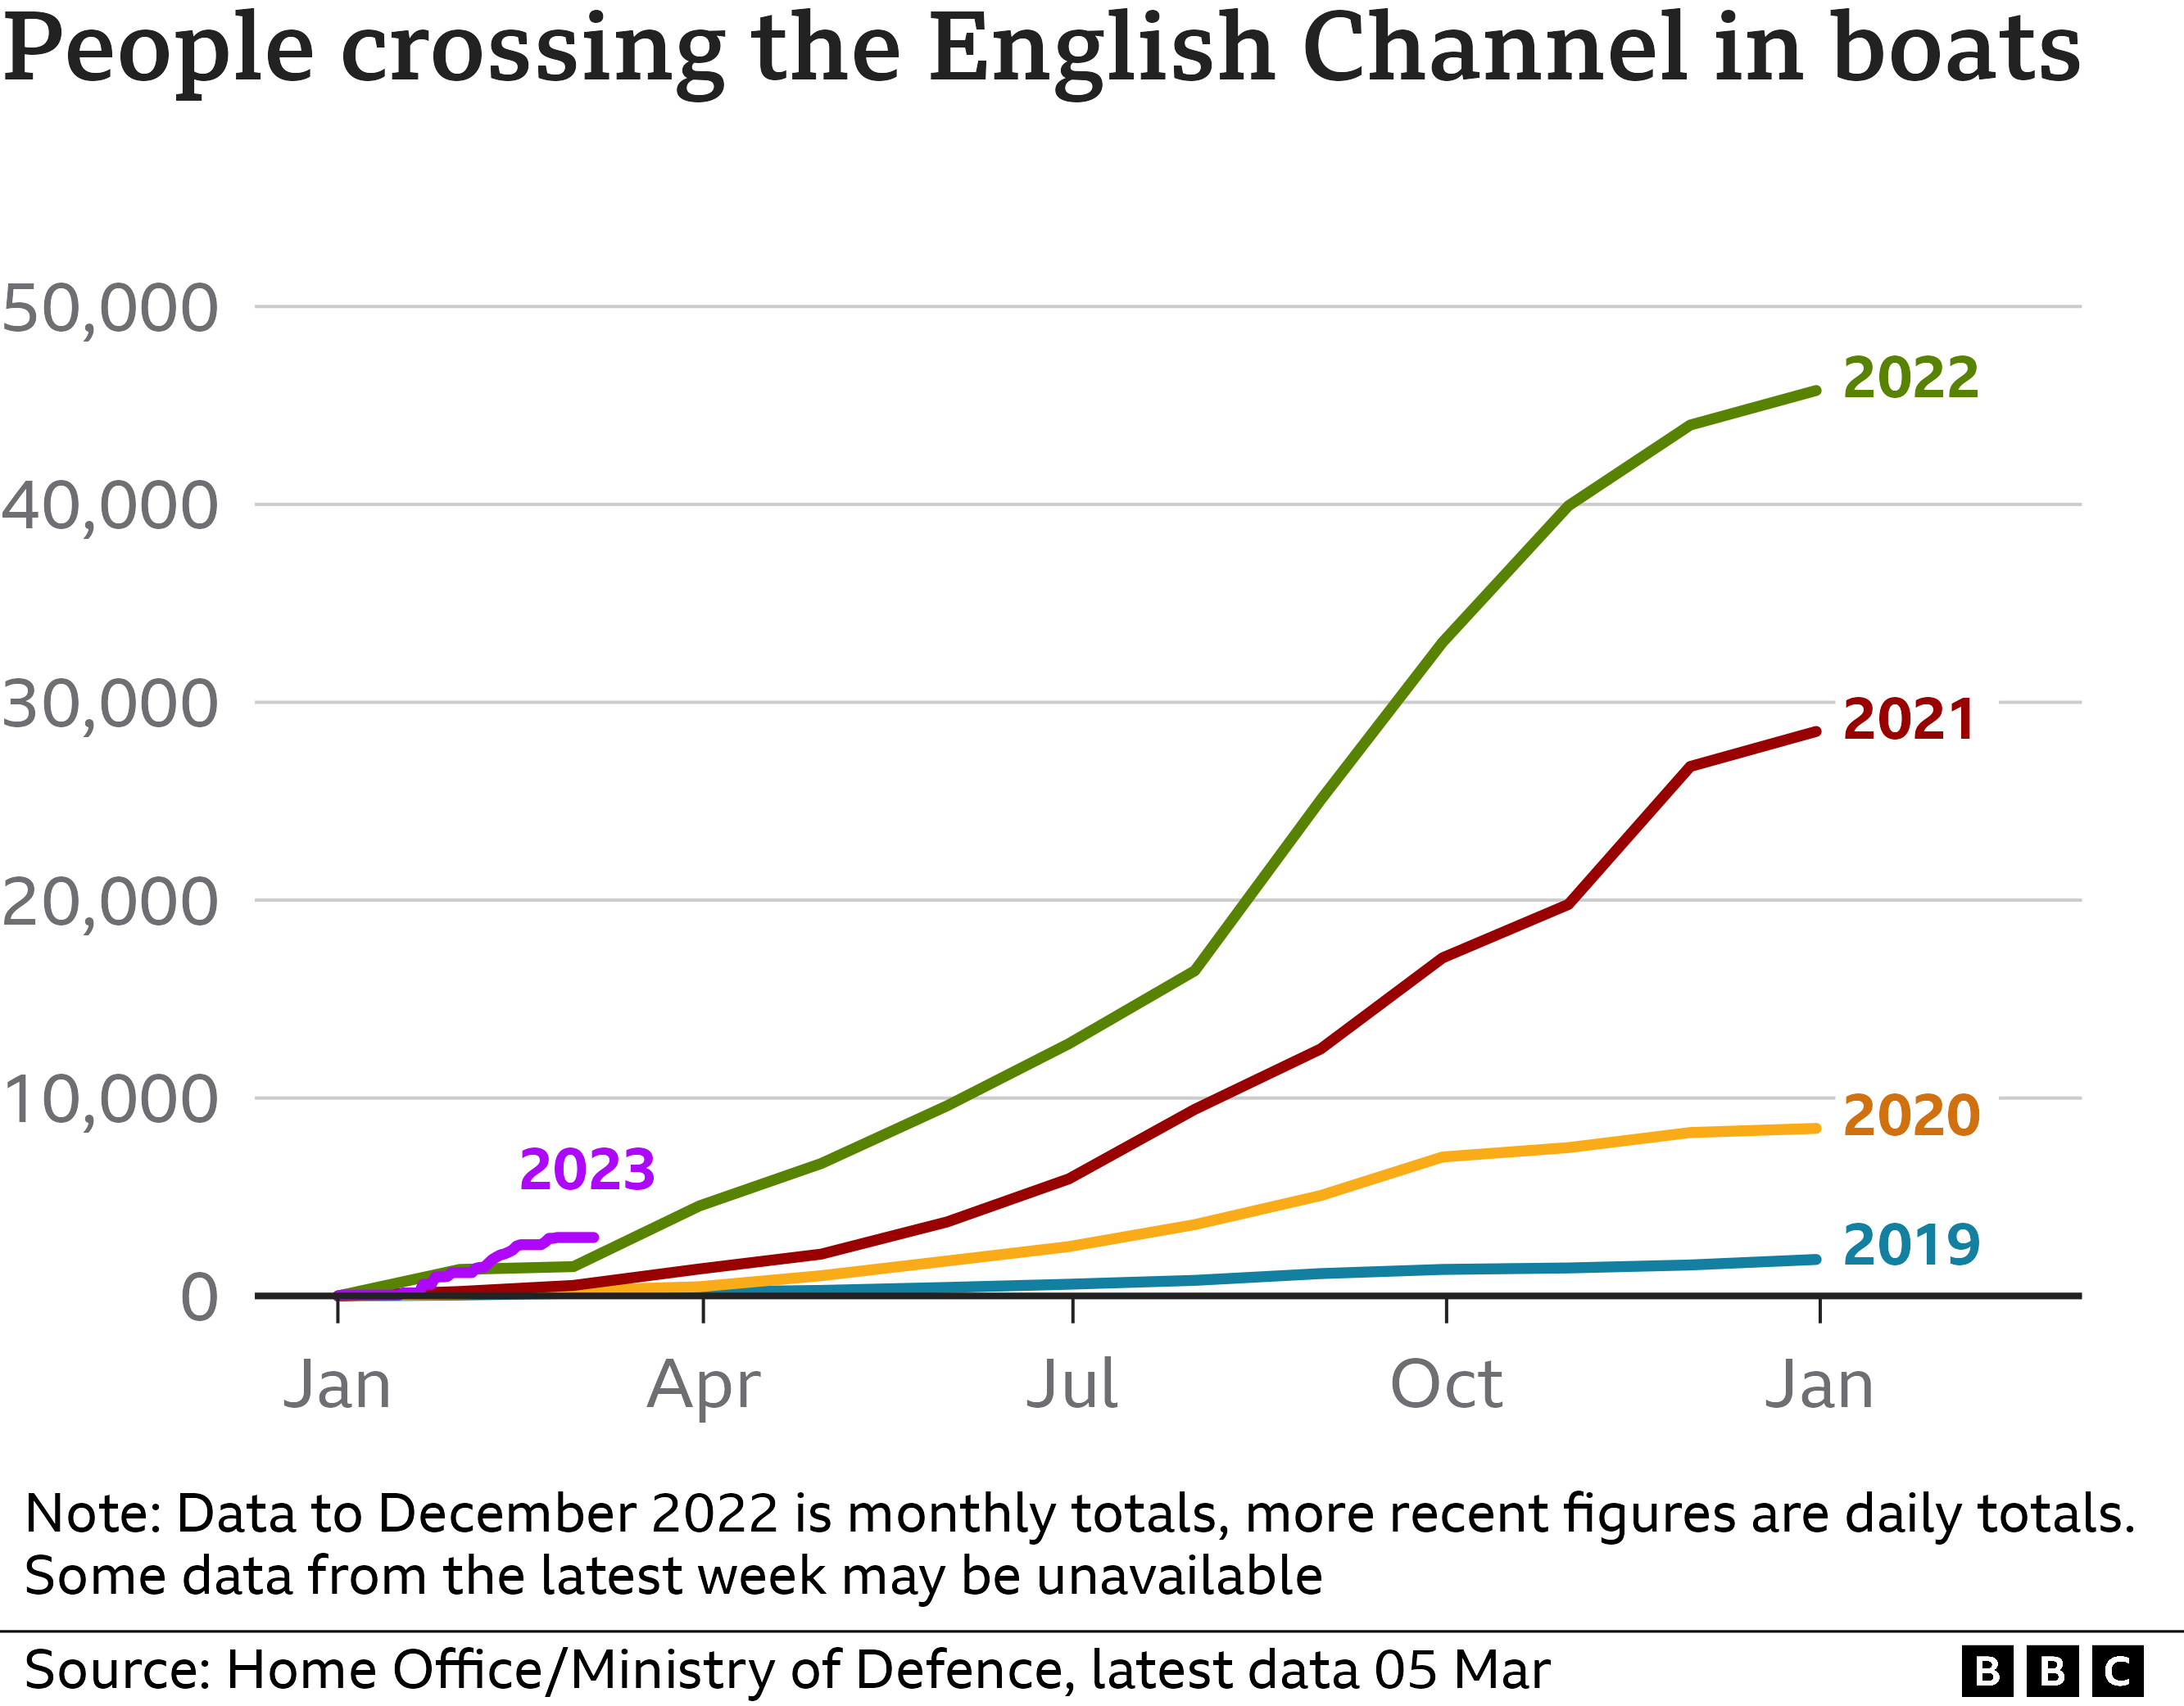 Chart showing the number of people crossing the English Channel in boats (March 2023)